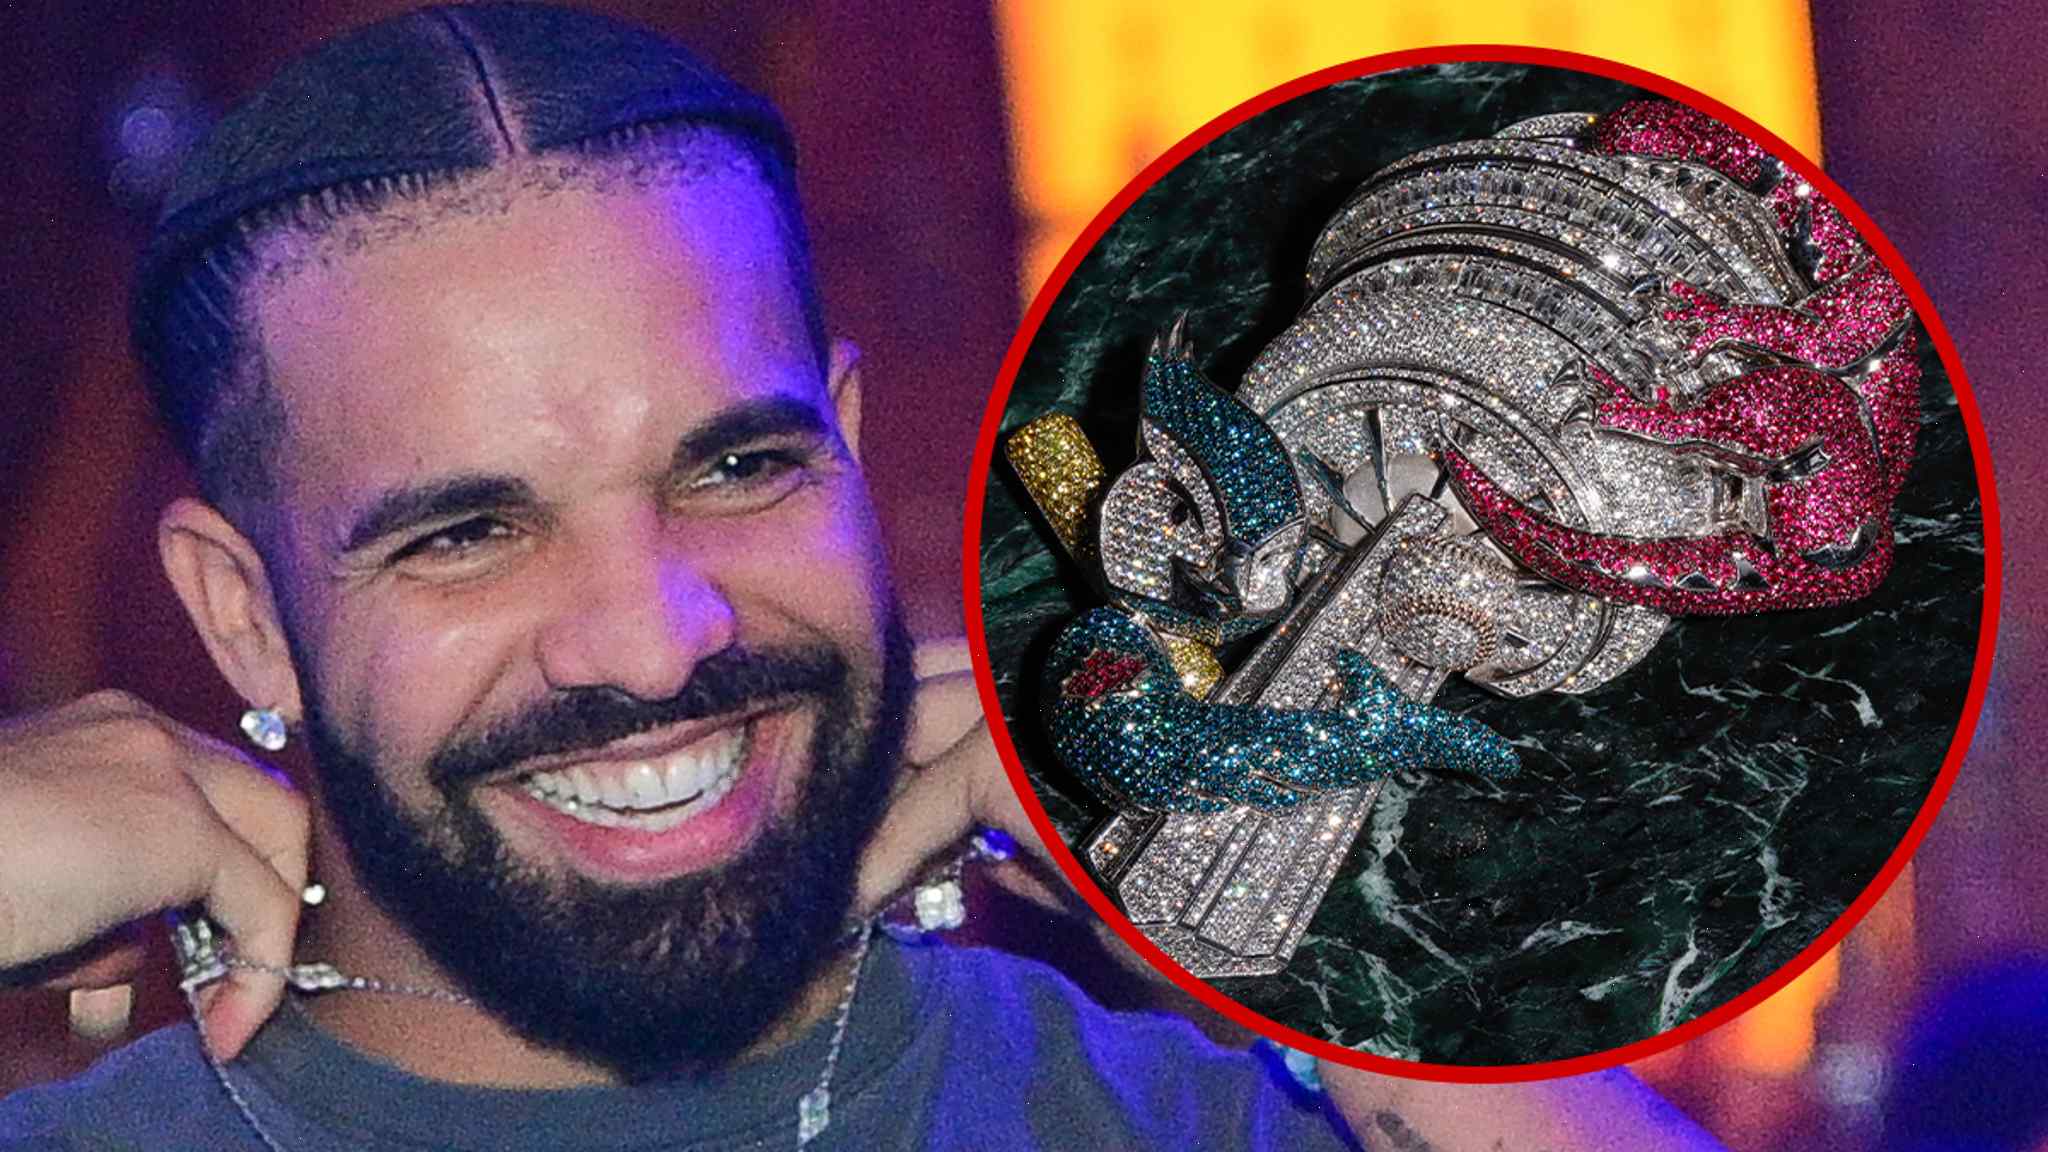 Shining Bright: Drake's Latest Bling, a Tribute to Toronto